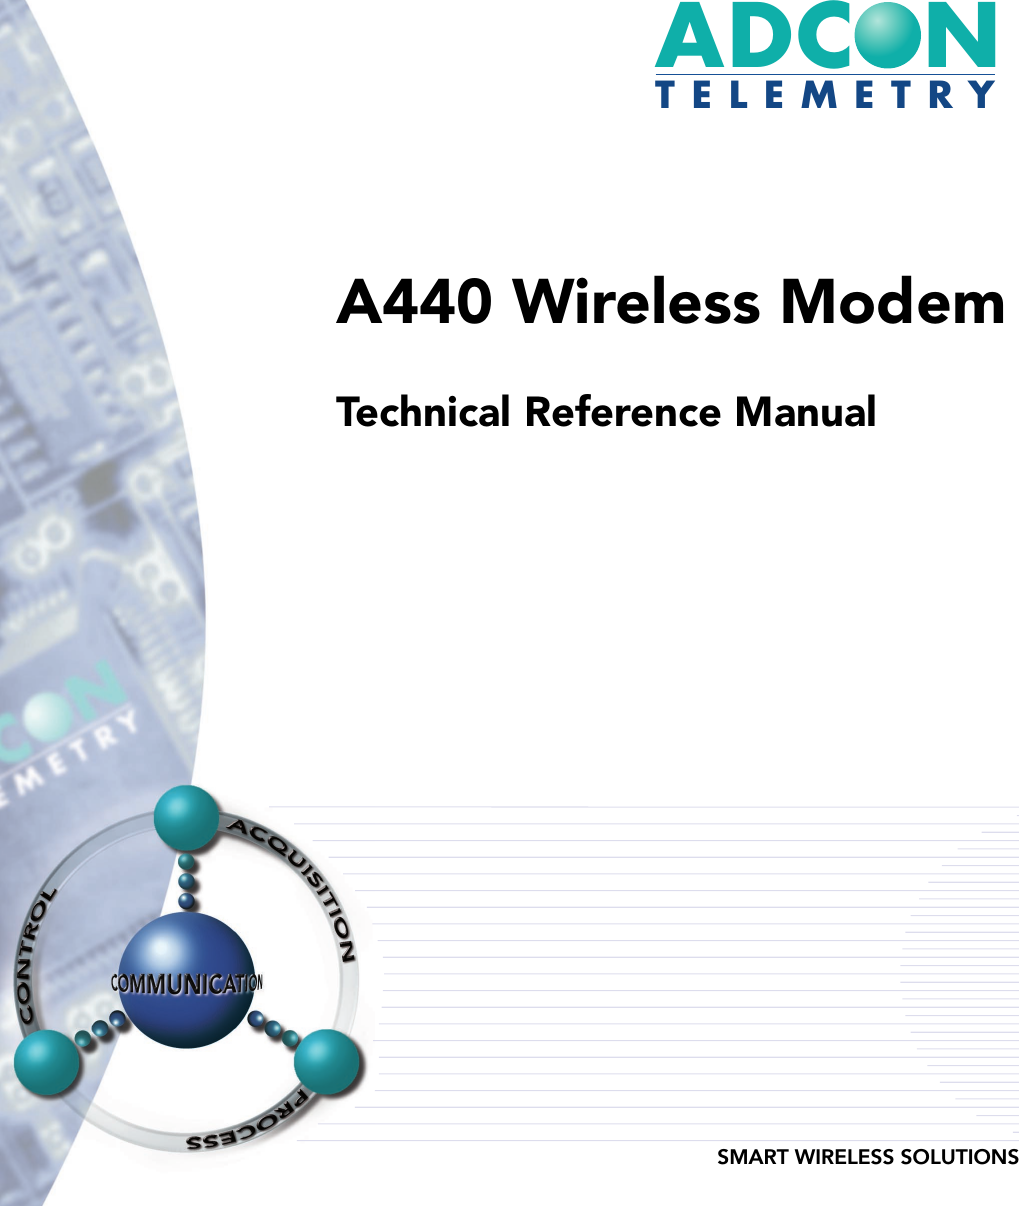  ADCONTELEMETRY SMART WIRELESS SOLUTIONS A440 Wireless Modem Technical Reference Manual